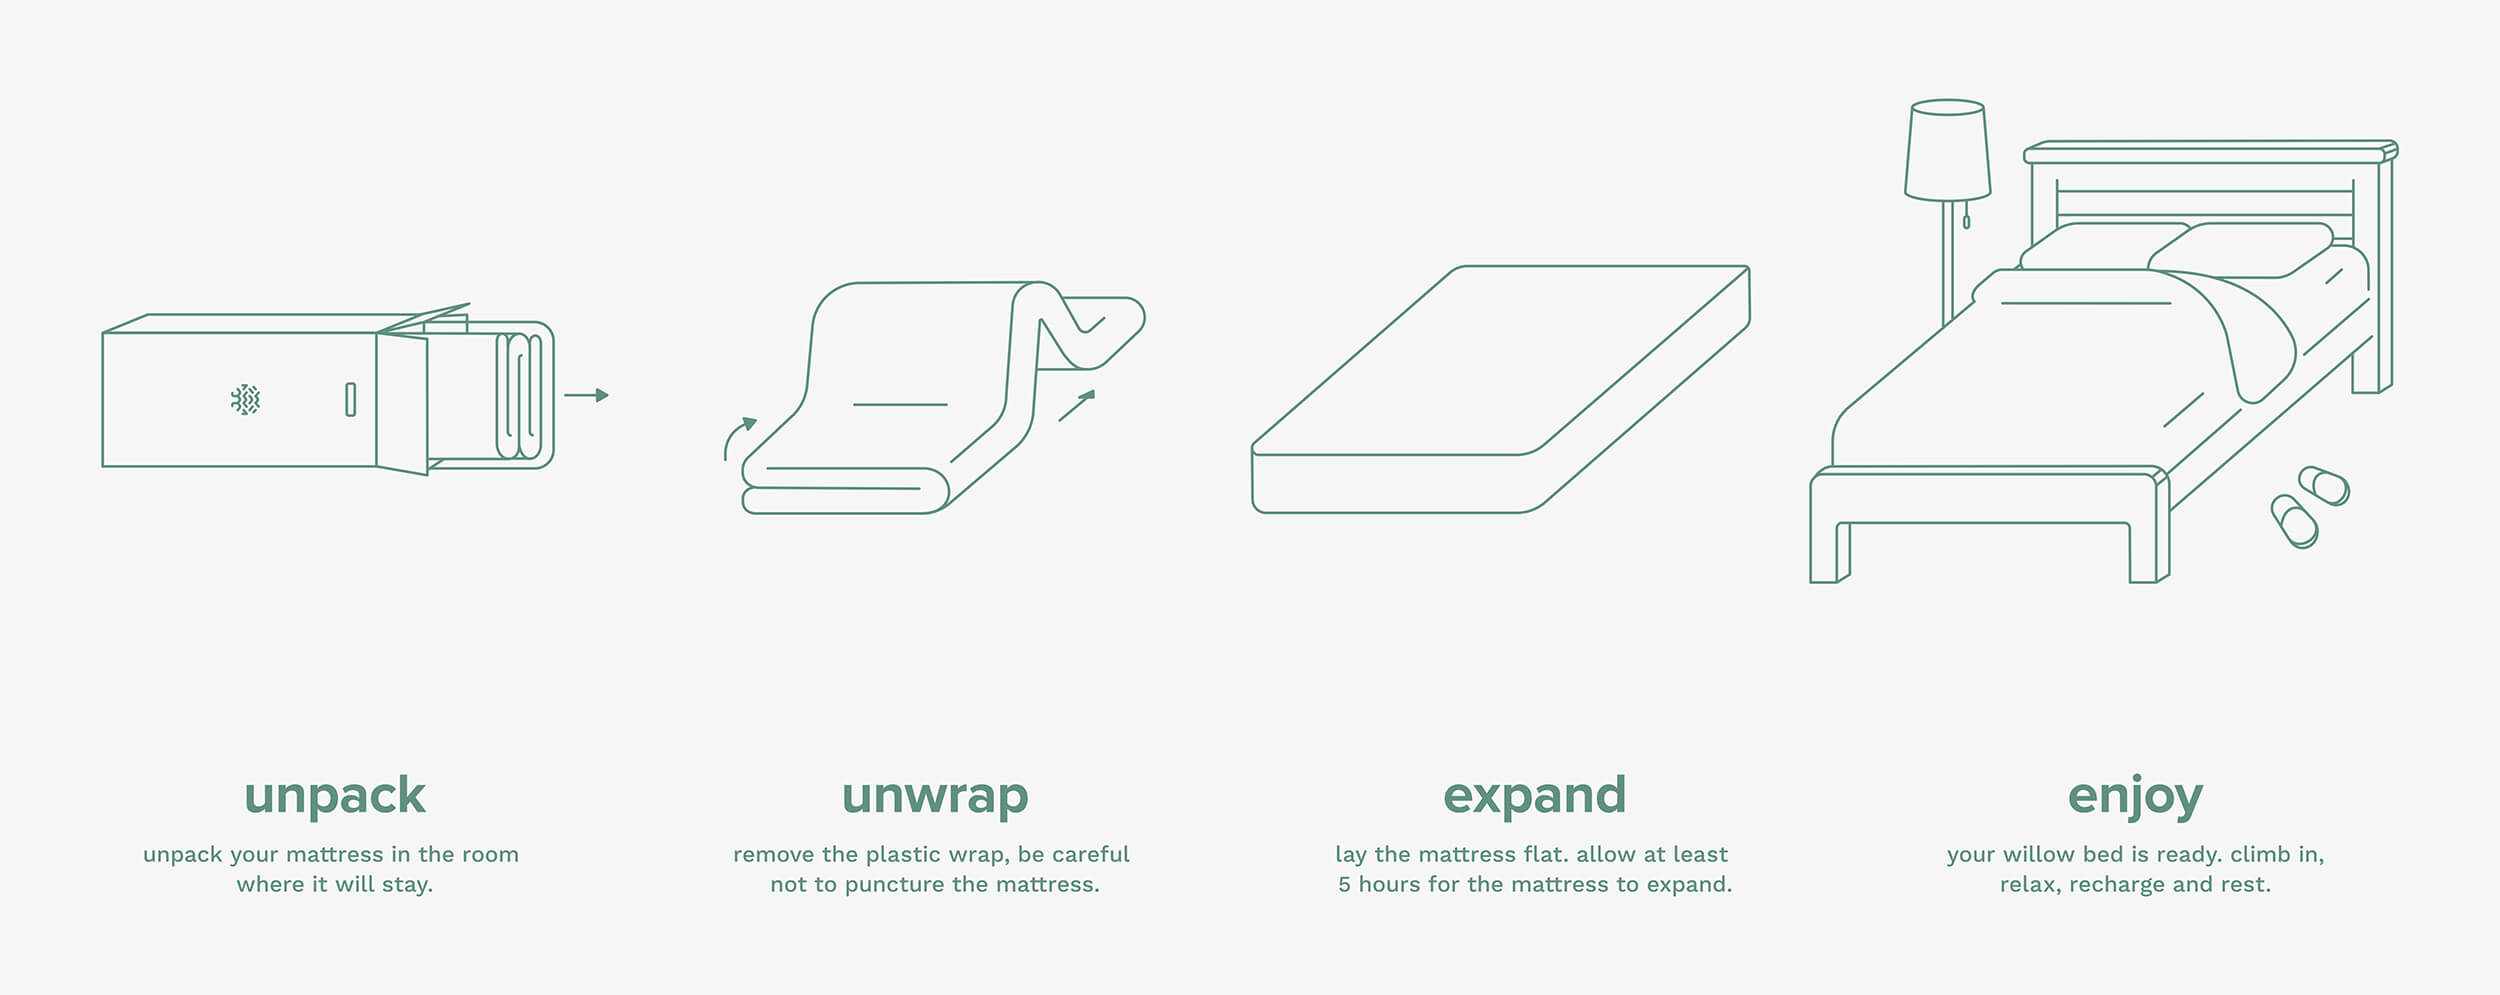 Instructional illustrations for Willow Bed mattresses detailing how to open and install the product